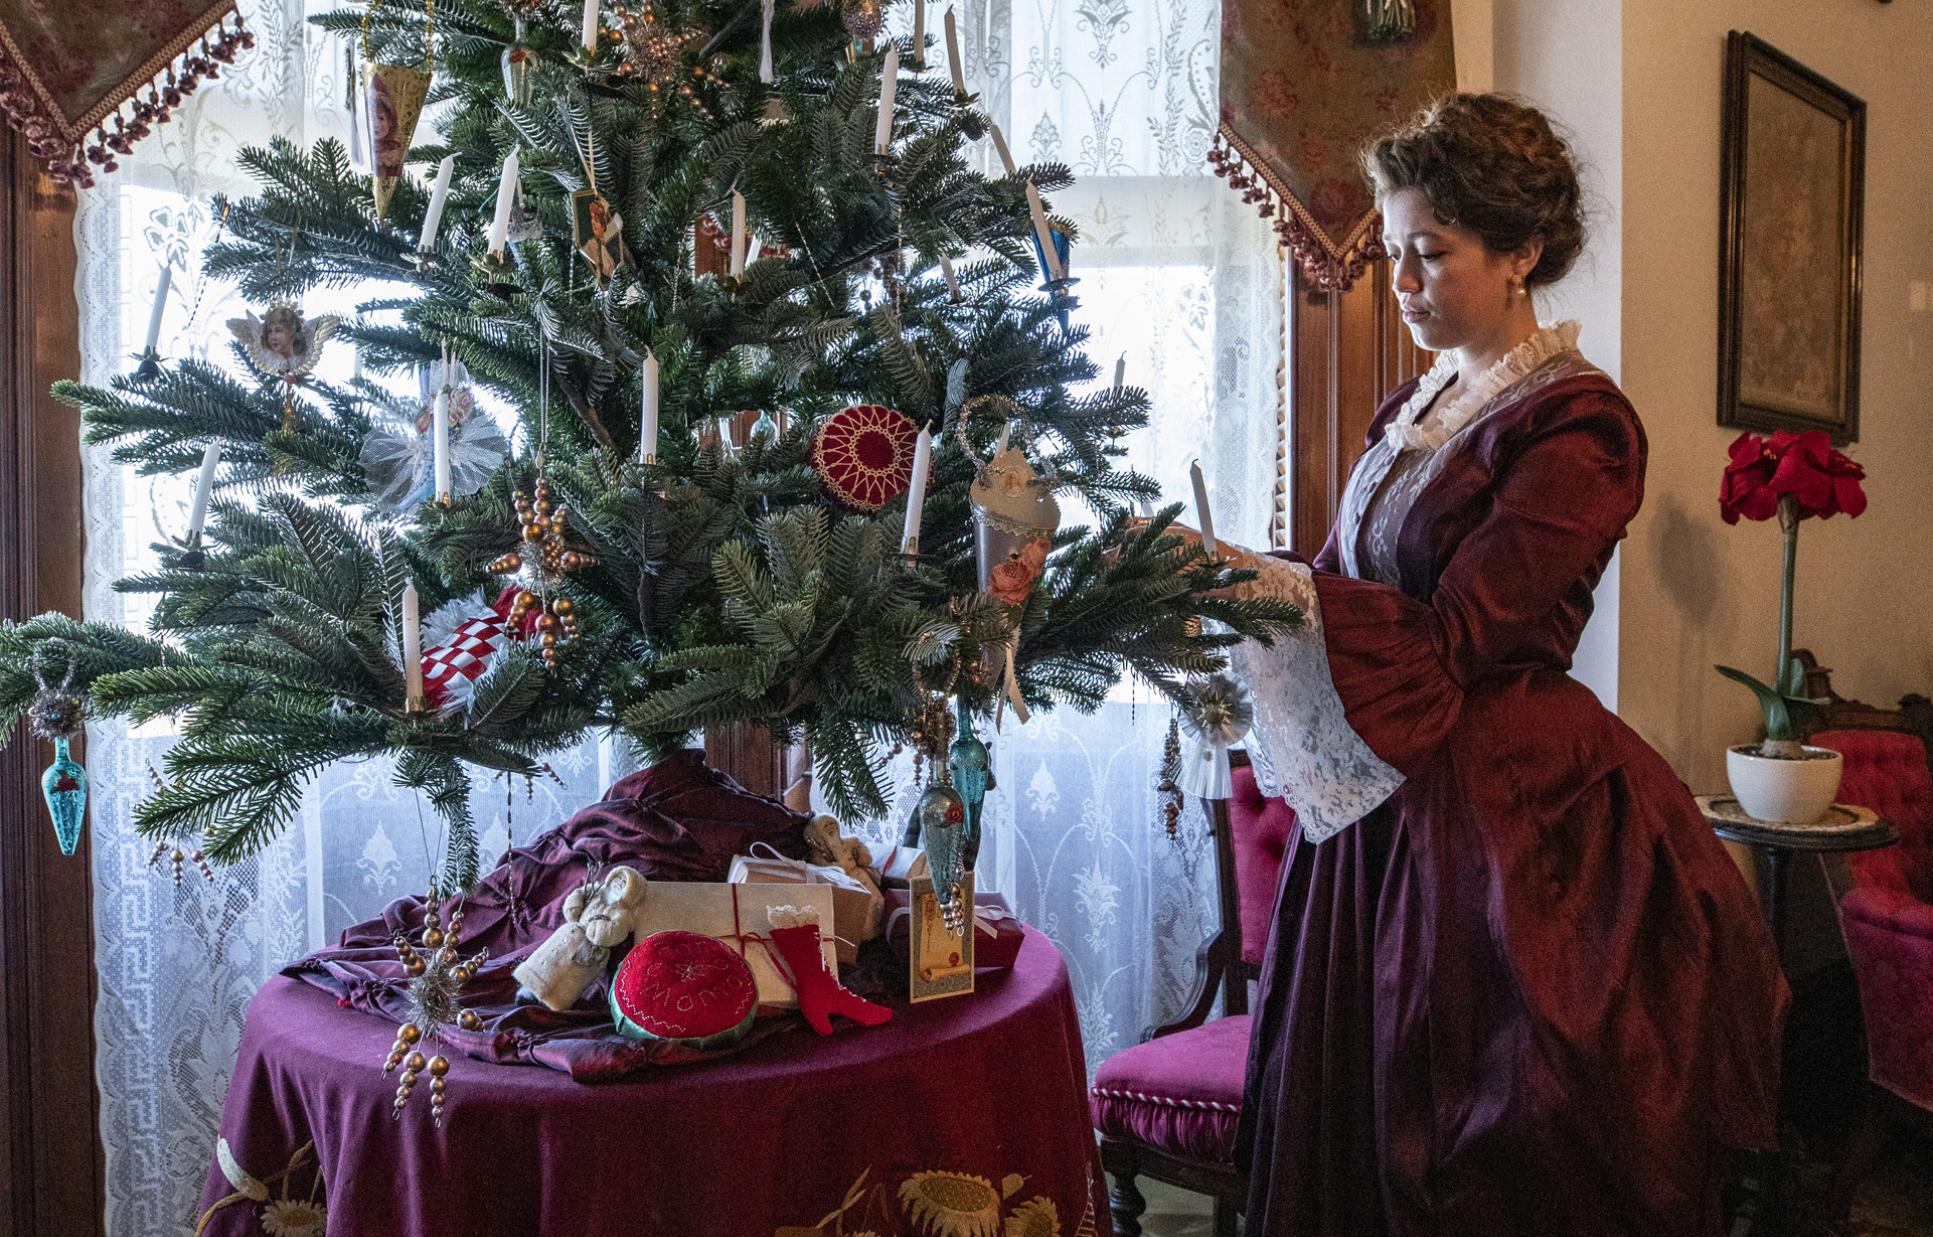 Reenactor putting ornaments on a Christmas tree